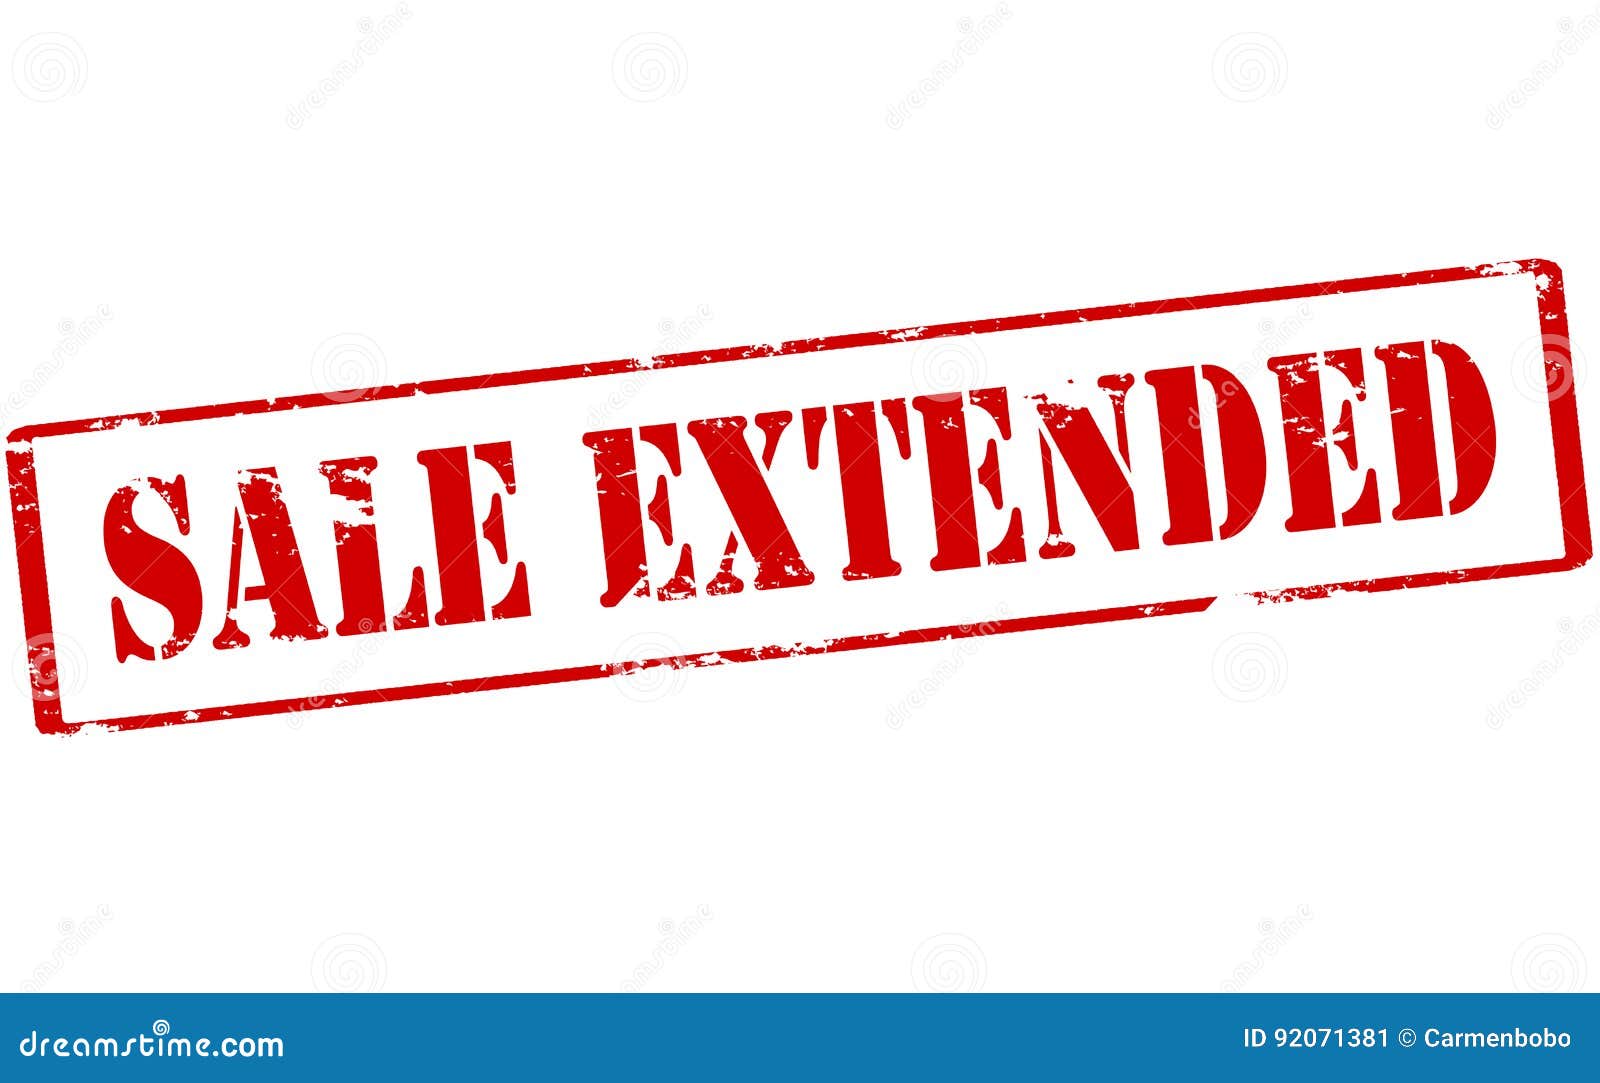 sale extended